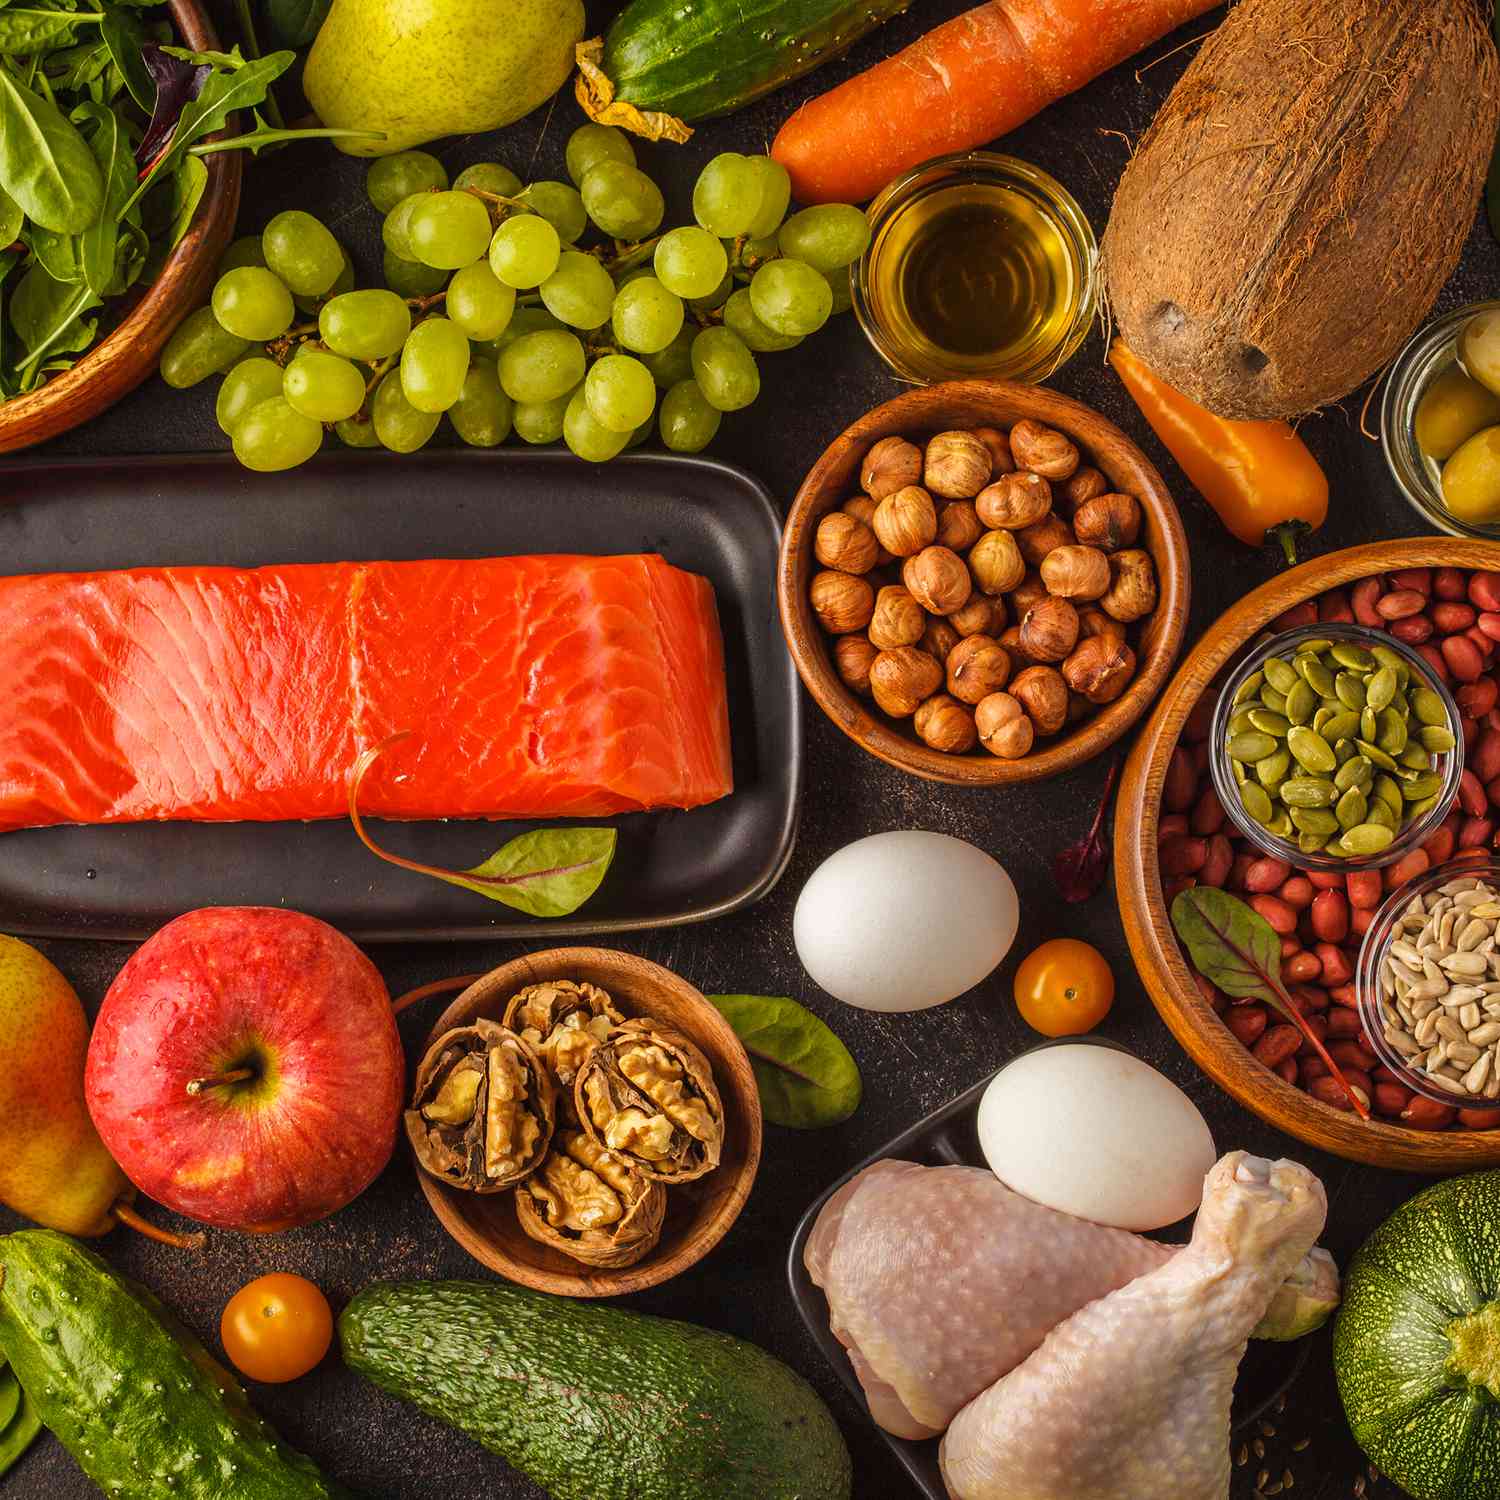 The Complete Paleo Diet Food List: What to Eat and What to Avoid